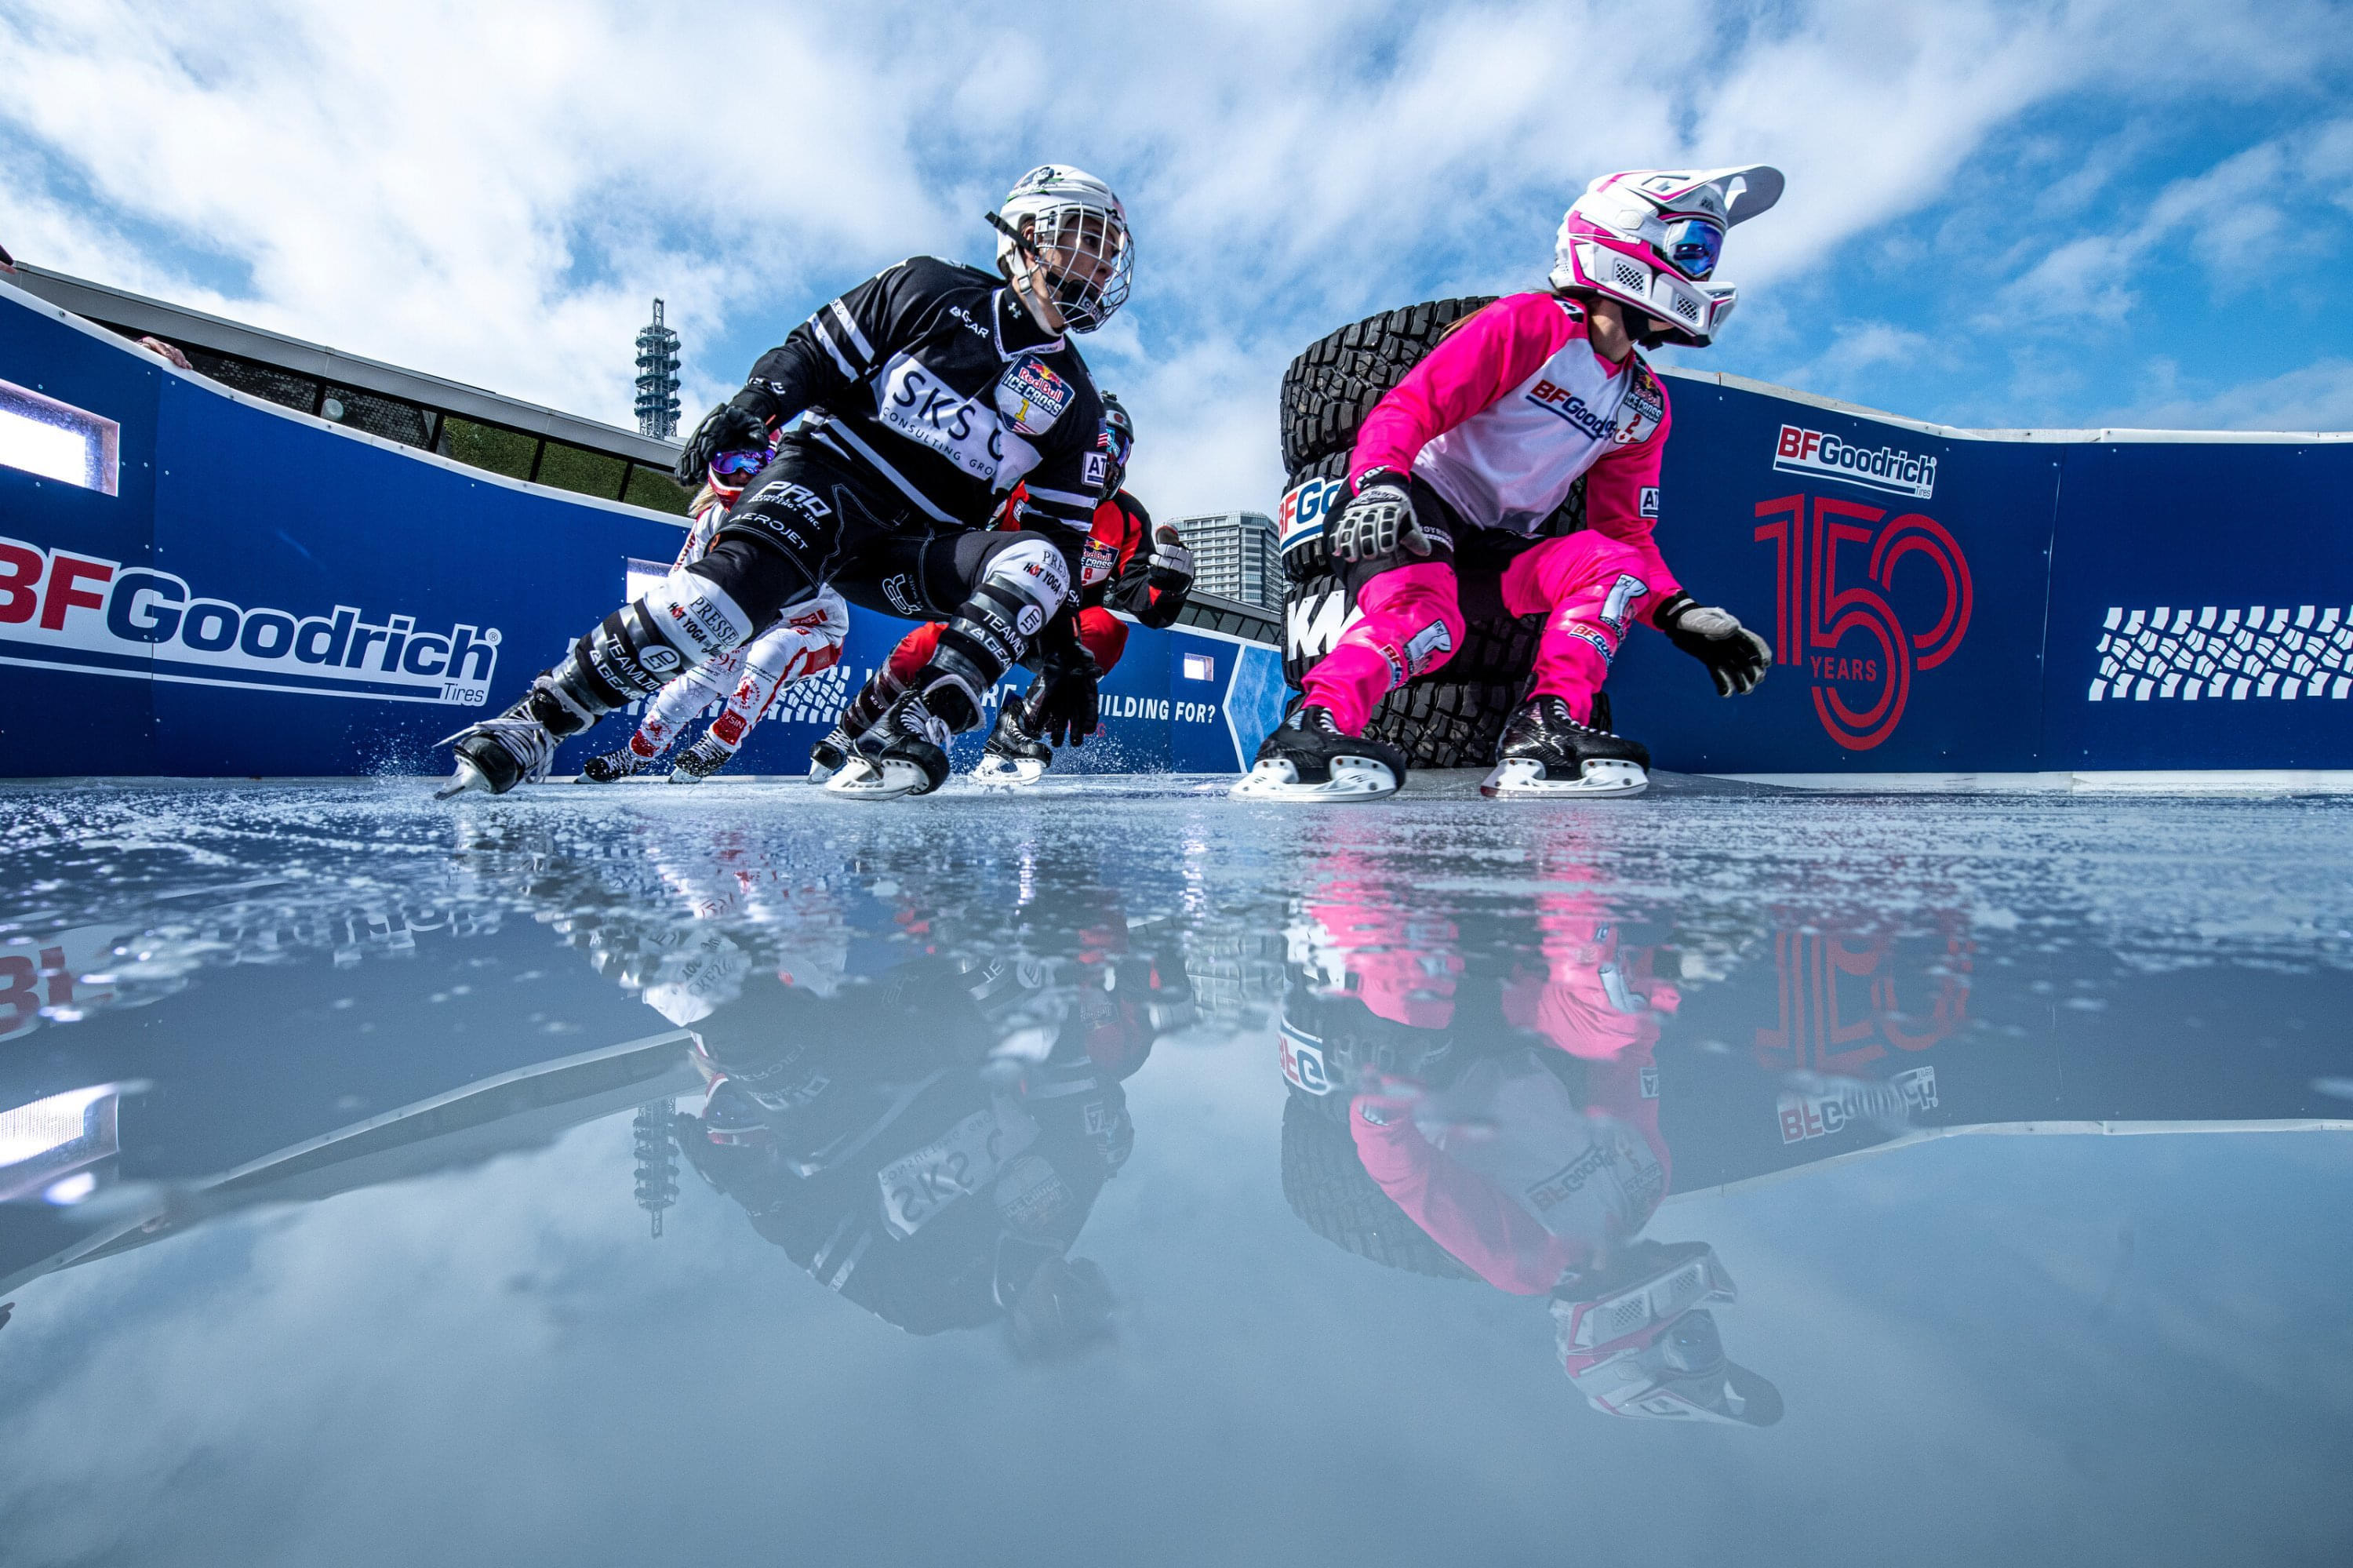 Legere and Trunzo are mirrored on the track as they tackle the BF Goodrich Toughness & Traction corner. Image: Mihai Stetcu / Red Bull Content Pool